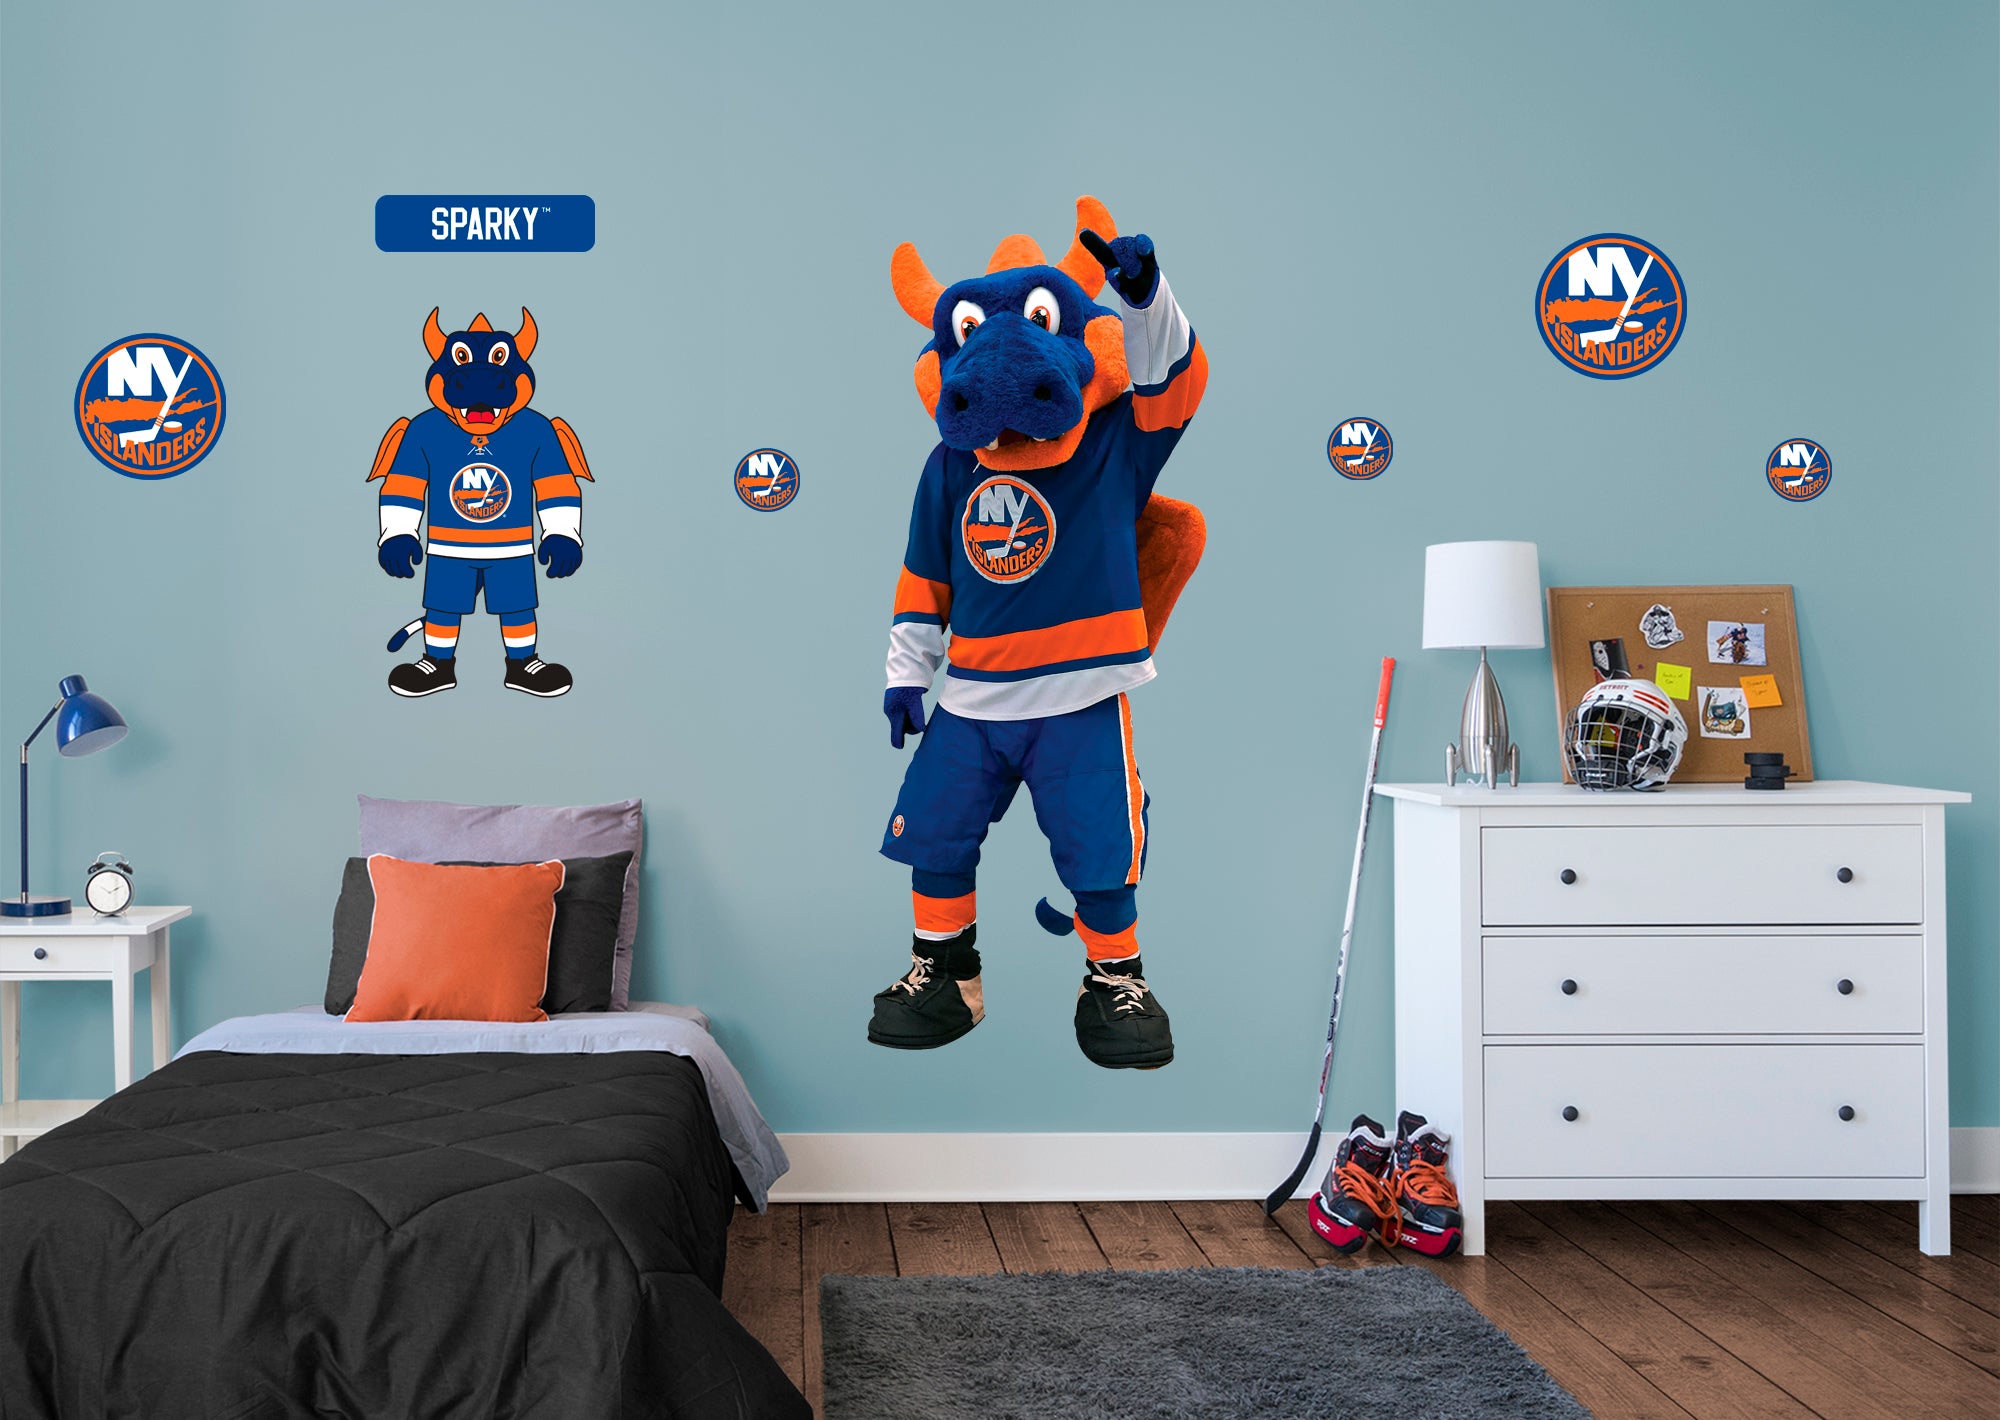  Bleacher Creatures New York Islanders Sparky The Dragon 10  Plush Figure - A Mascot for Play or Display : Sports & Outdoors